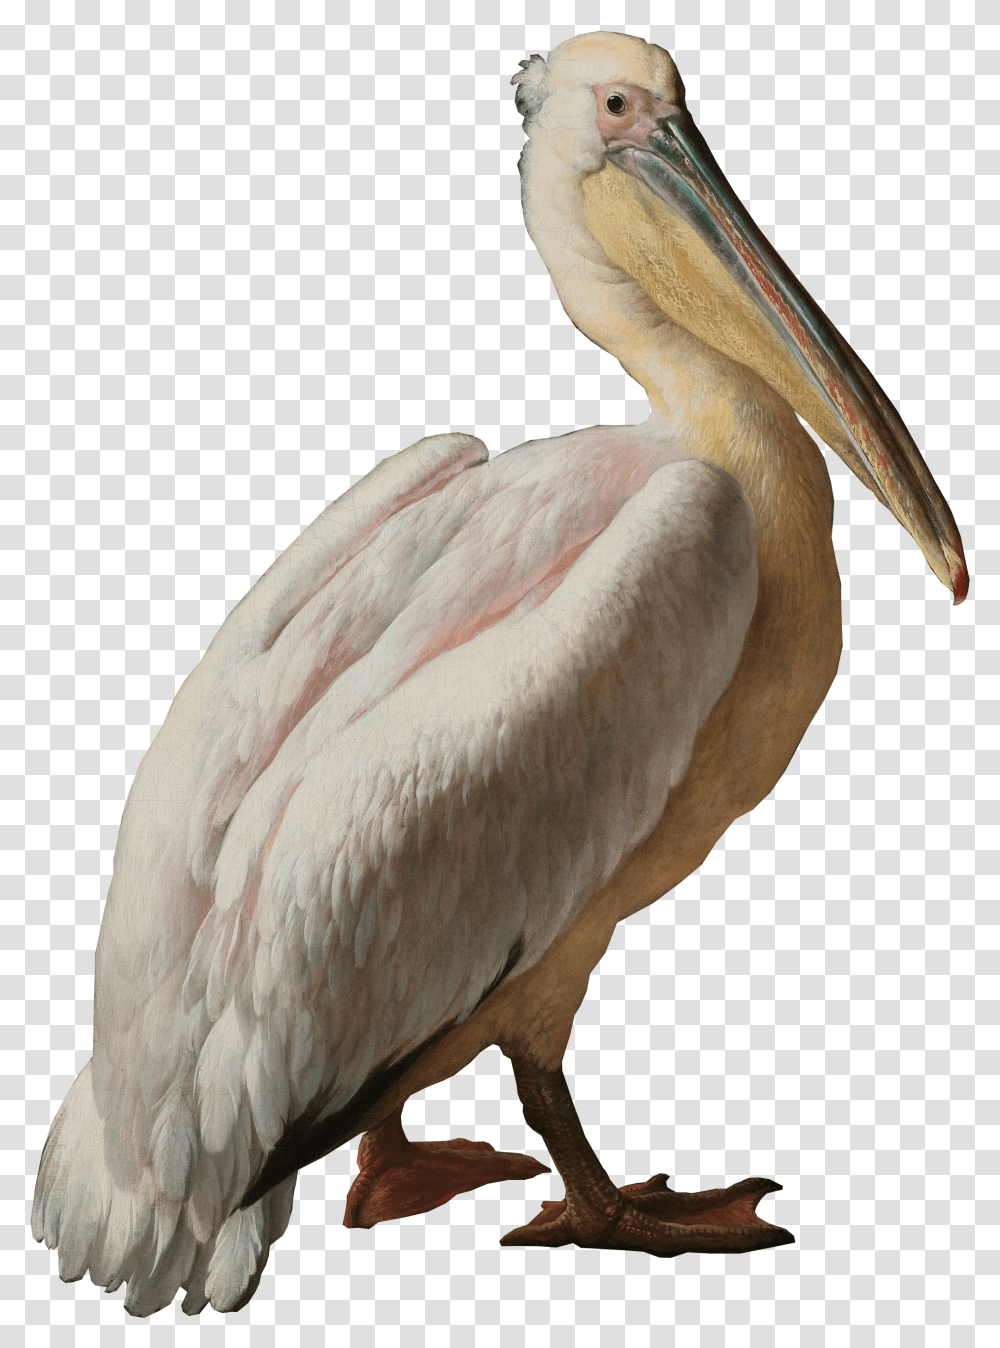 Pelican Seabird Pelecaniformes Water Bird Pelican Pelican And Other Birds Near A Known As Floating Transparent Png